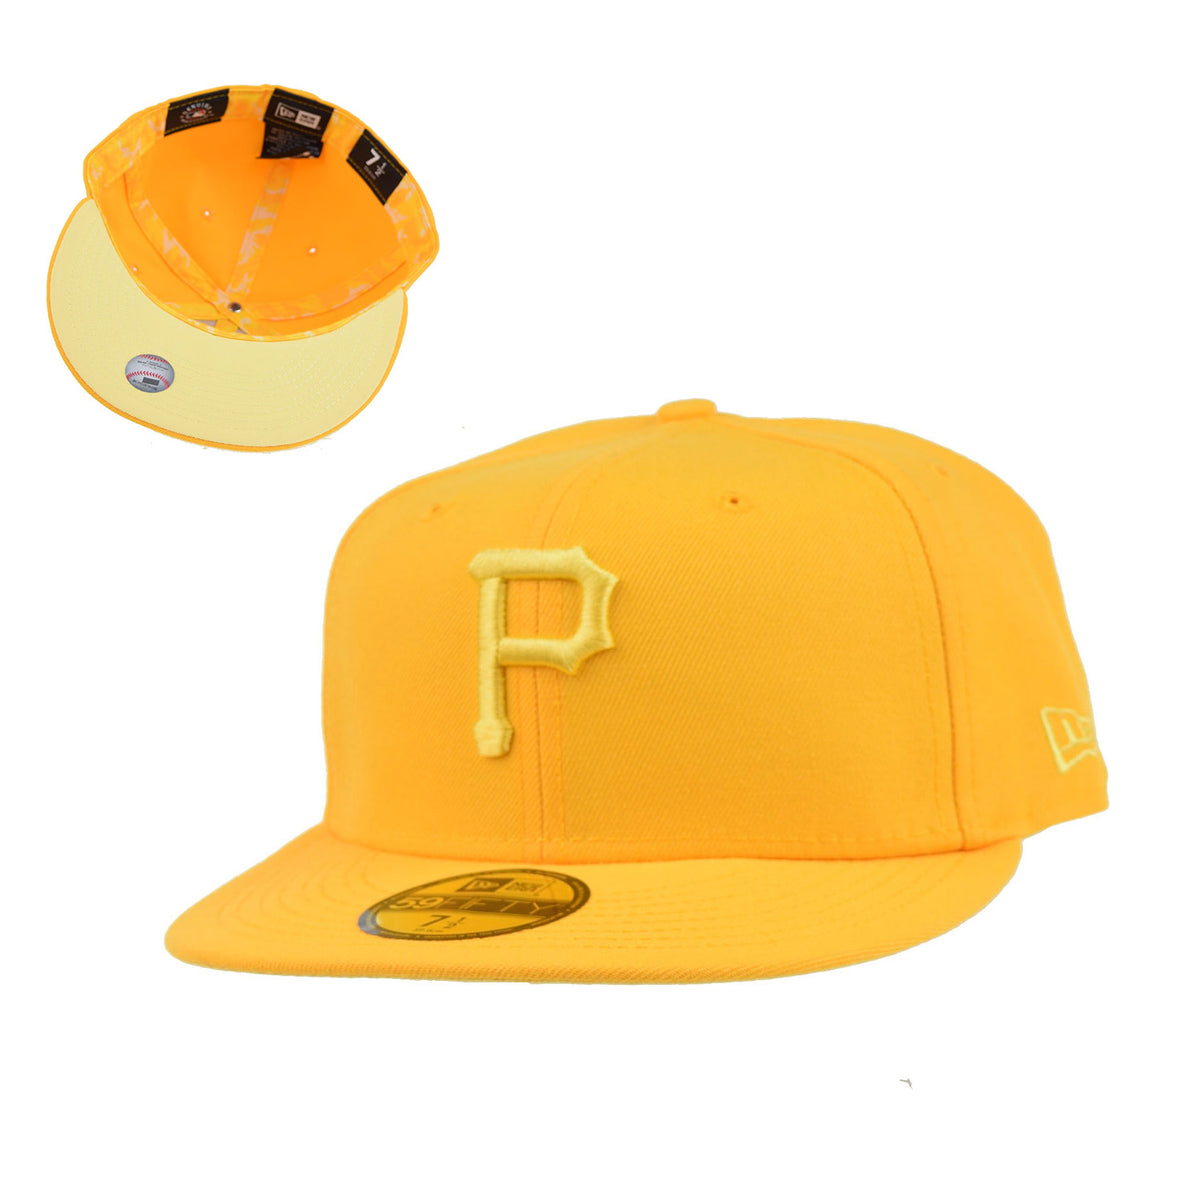 New Era Men's Pittsburgh Pirates 59FIFTY Retro Fitted Hat - Black - 7 5/8 Each